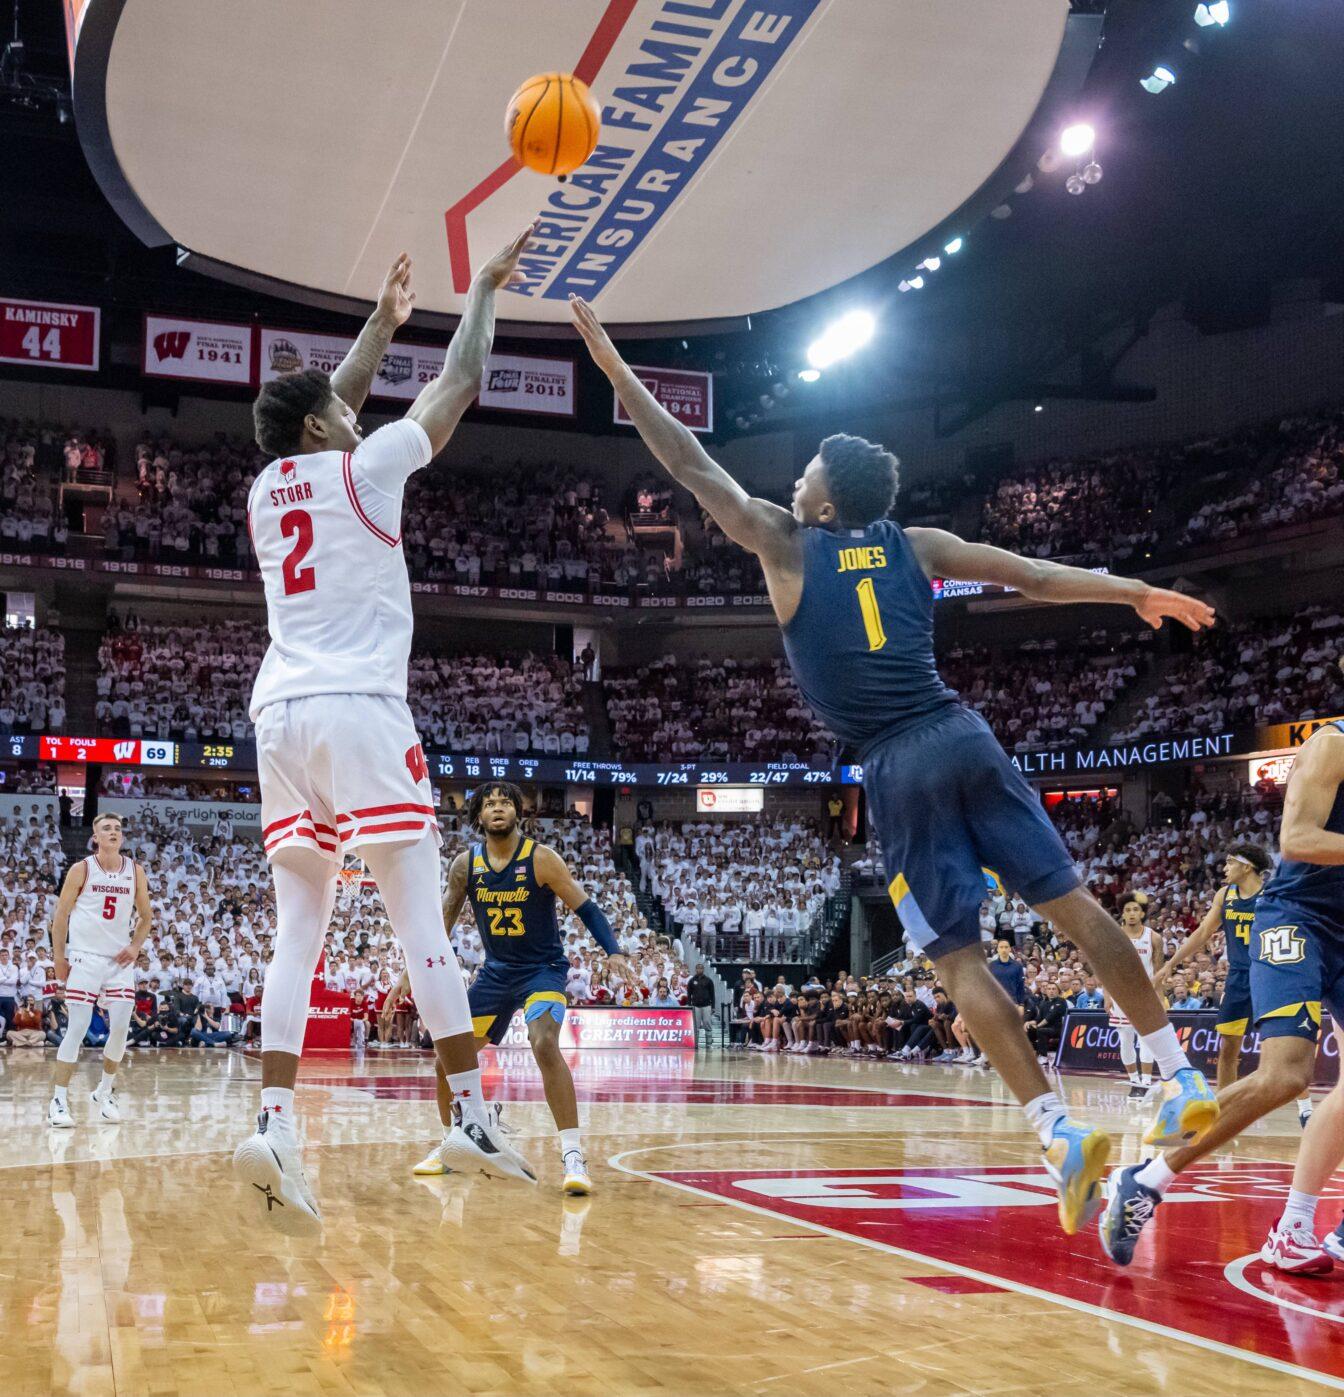 Badgers stun No. 3 Marquette, claim third straight victory over Golden Eagles